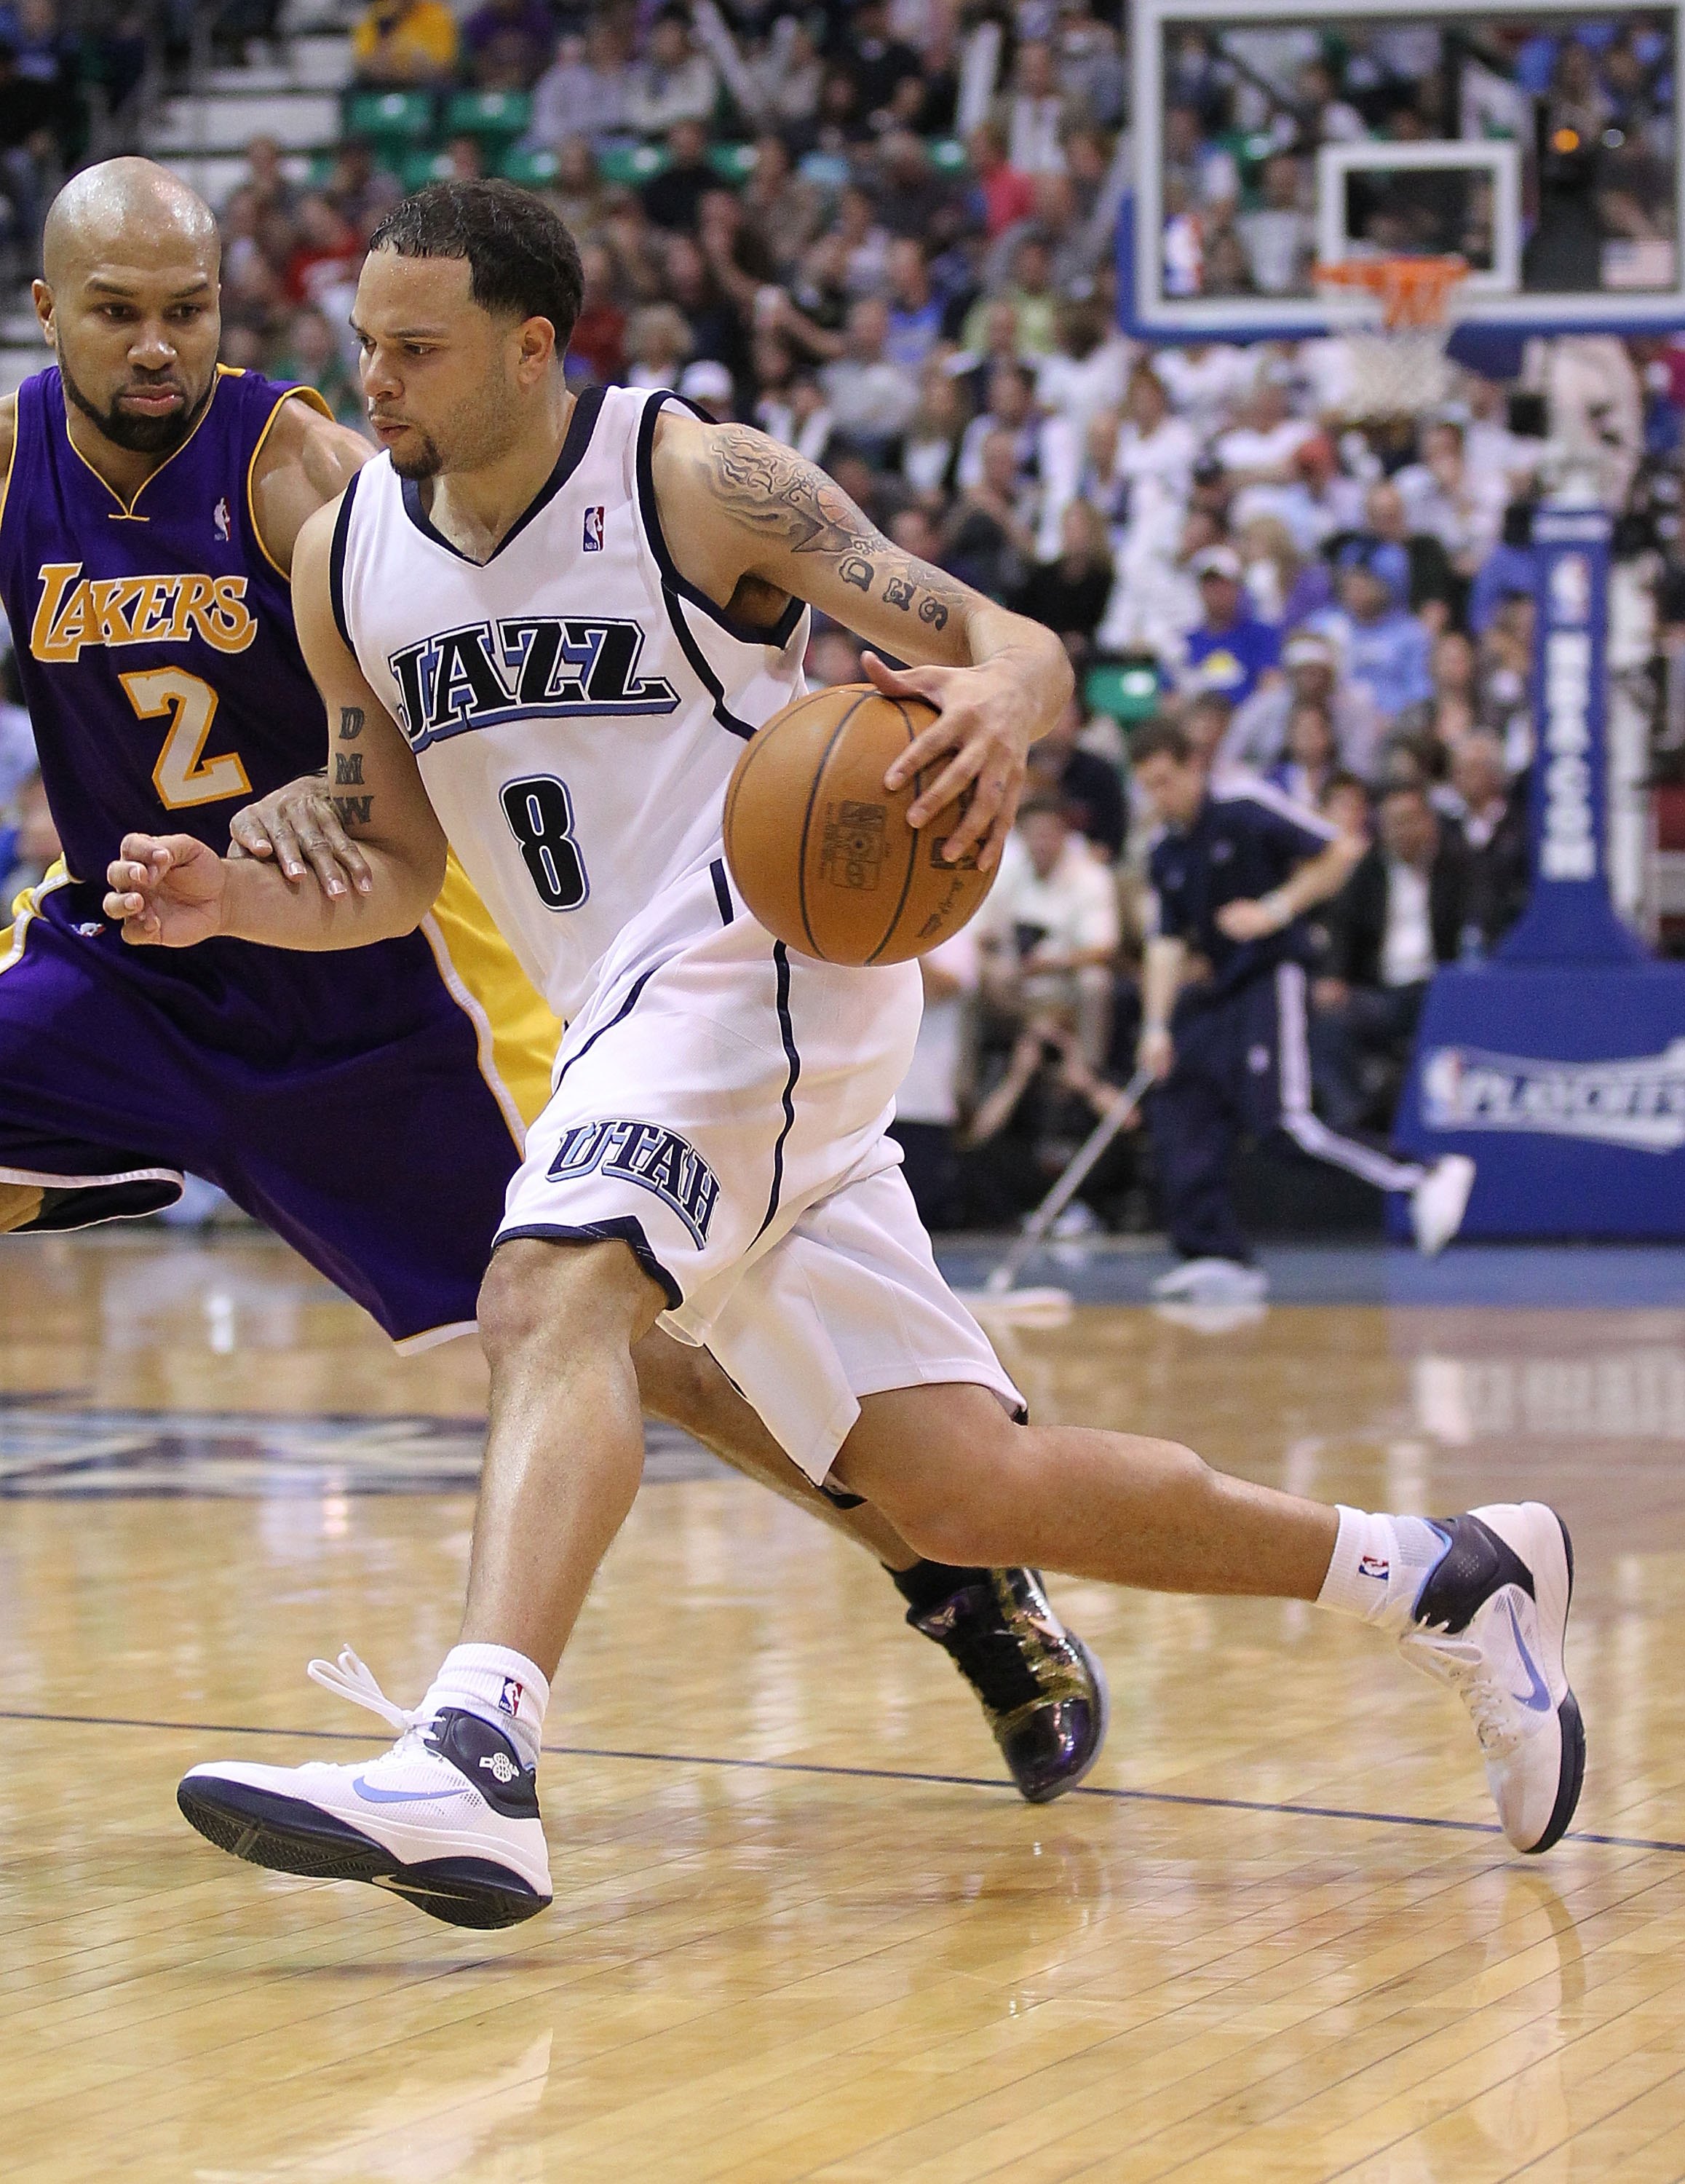 SALT LAKE CITY - MAY 10:  Deron Williams #8 of the Utah Jazz in action against the Los Angeles Lakers during Game Four of the Western Conference Semifinals of the 2010 NBA Playoffs on May 10, 2010 at Energy Solutions Arena in Salt Lake City, Utah. NOTE TO